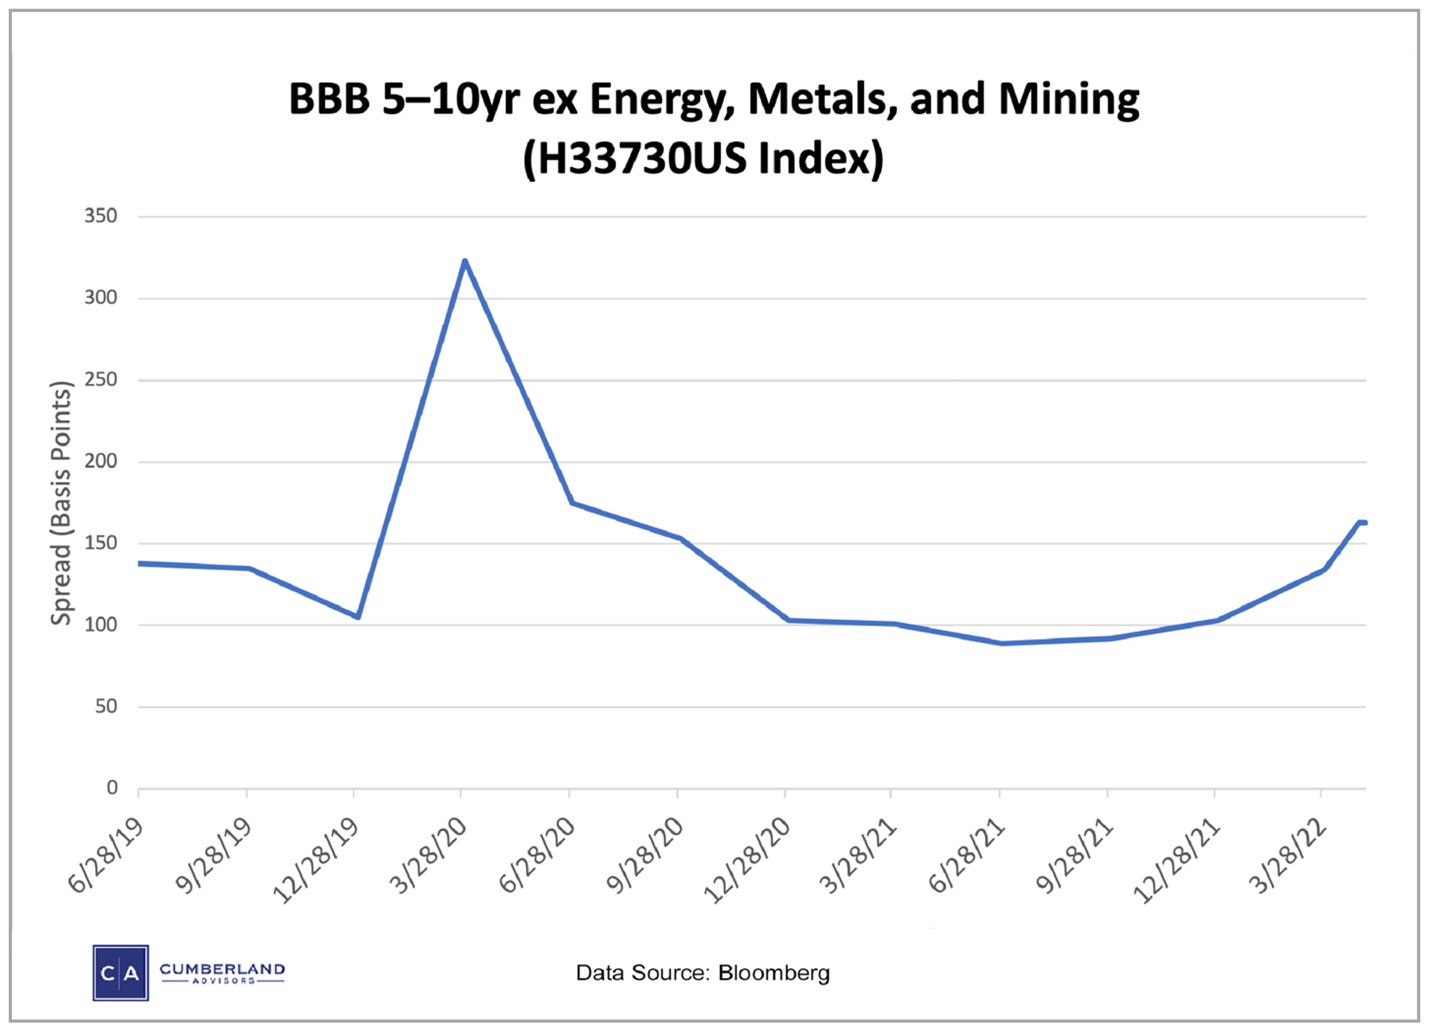 A Bond Metric for Stock Markets - BBB 5—10yr ex Energy, Metals, and Mining Chart (H33730US Index)